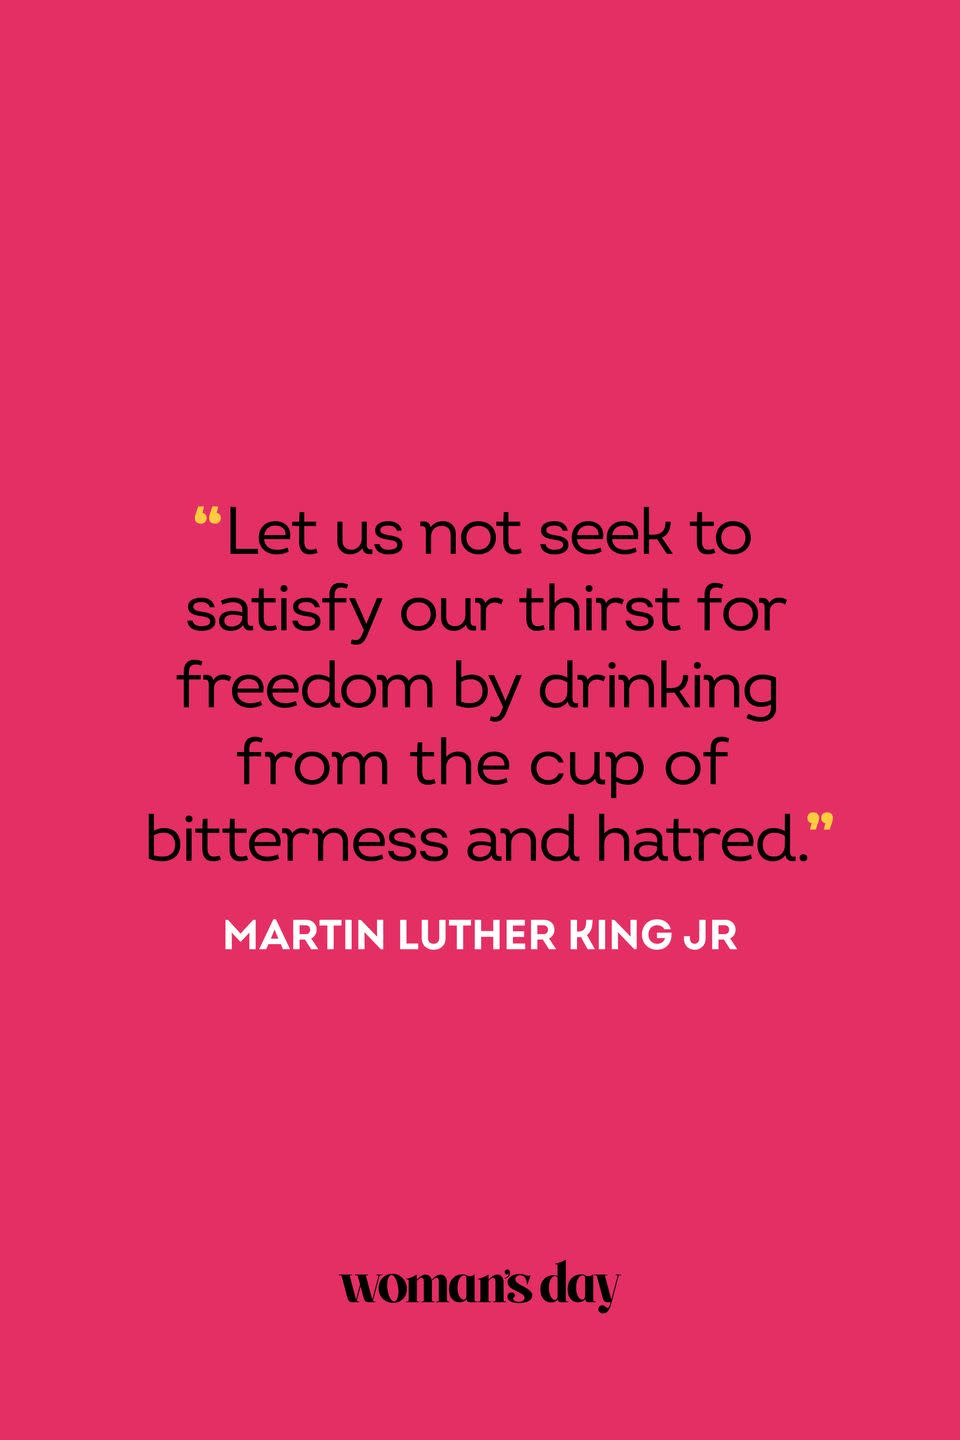 martin luther king jr quotes best mlk quotes